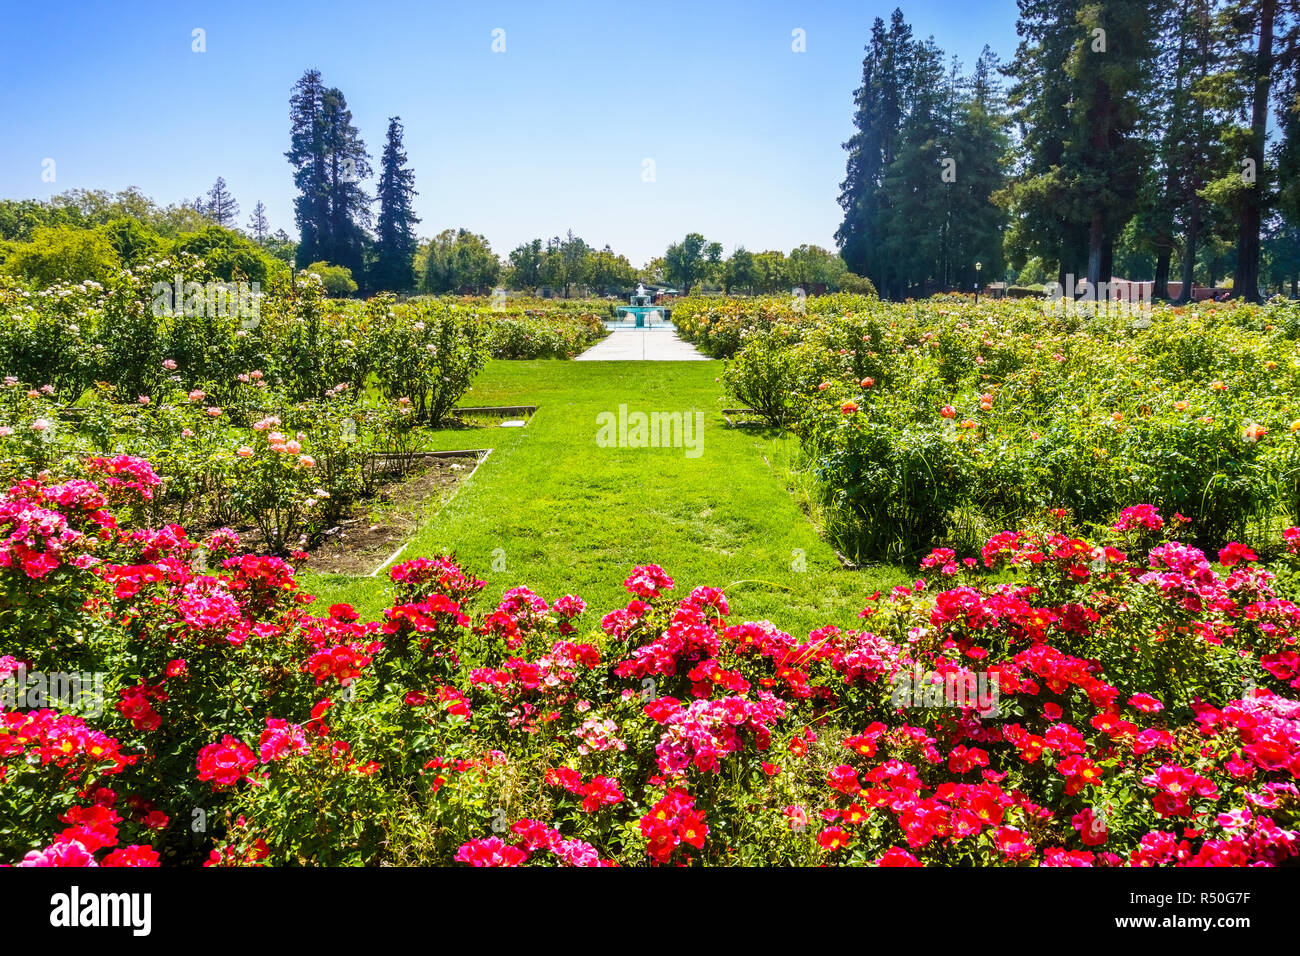 Beautifully landscaped grounds with roses in full bloom, the Municipal Rose Garden, San Jose, south San Francisco bay area, California Stock Photo